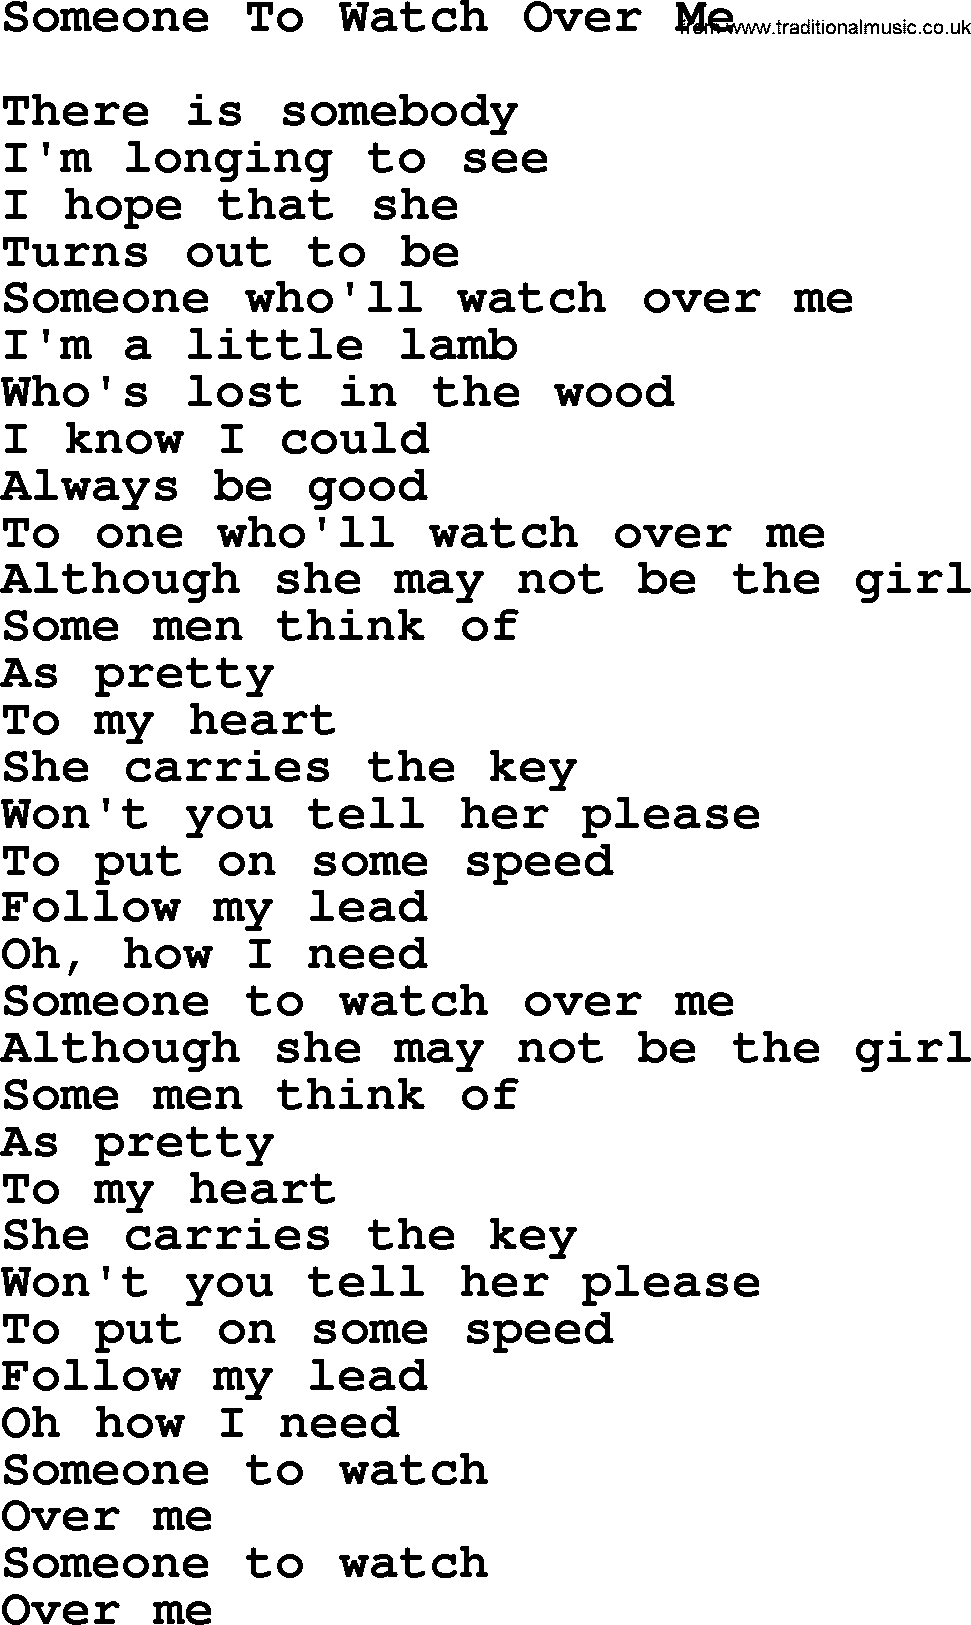 Willie Nelson song: Someone To Watch Over Me lyrics